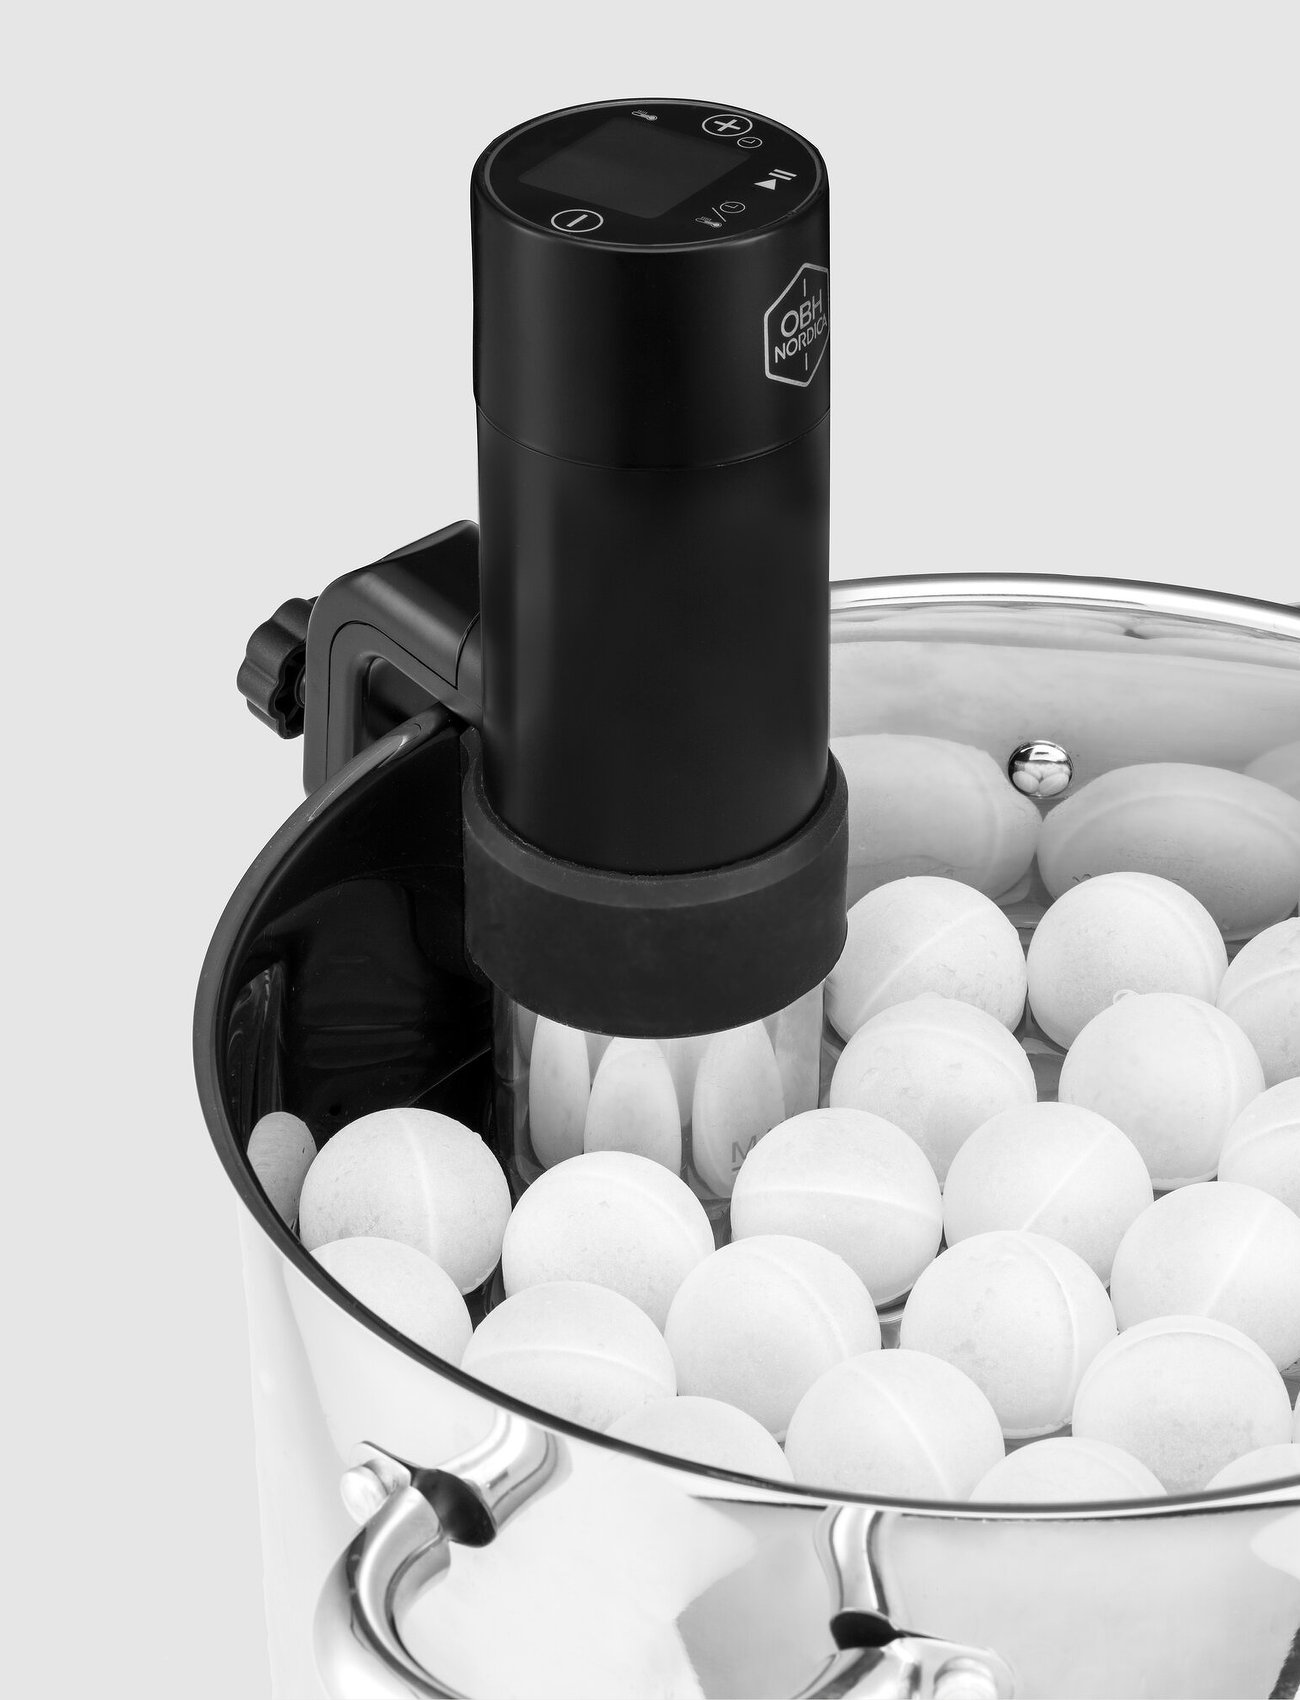 OBH Nordica - Immersion sous vide pro plus sous vide cooker - geburtstagsgeschenke - black and stainless steel - 1